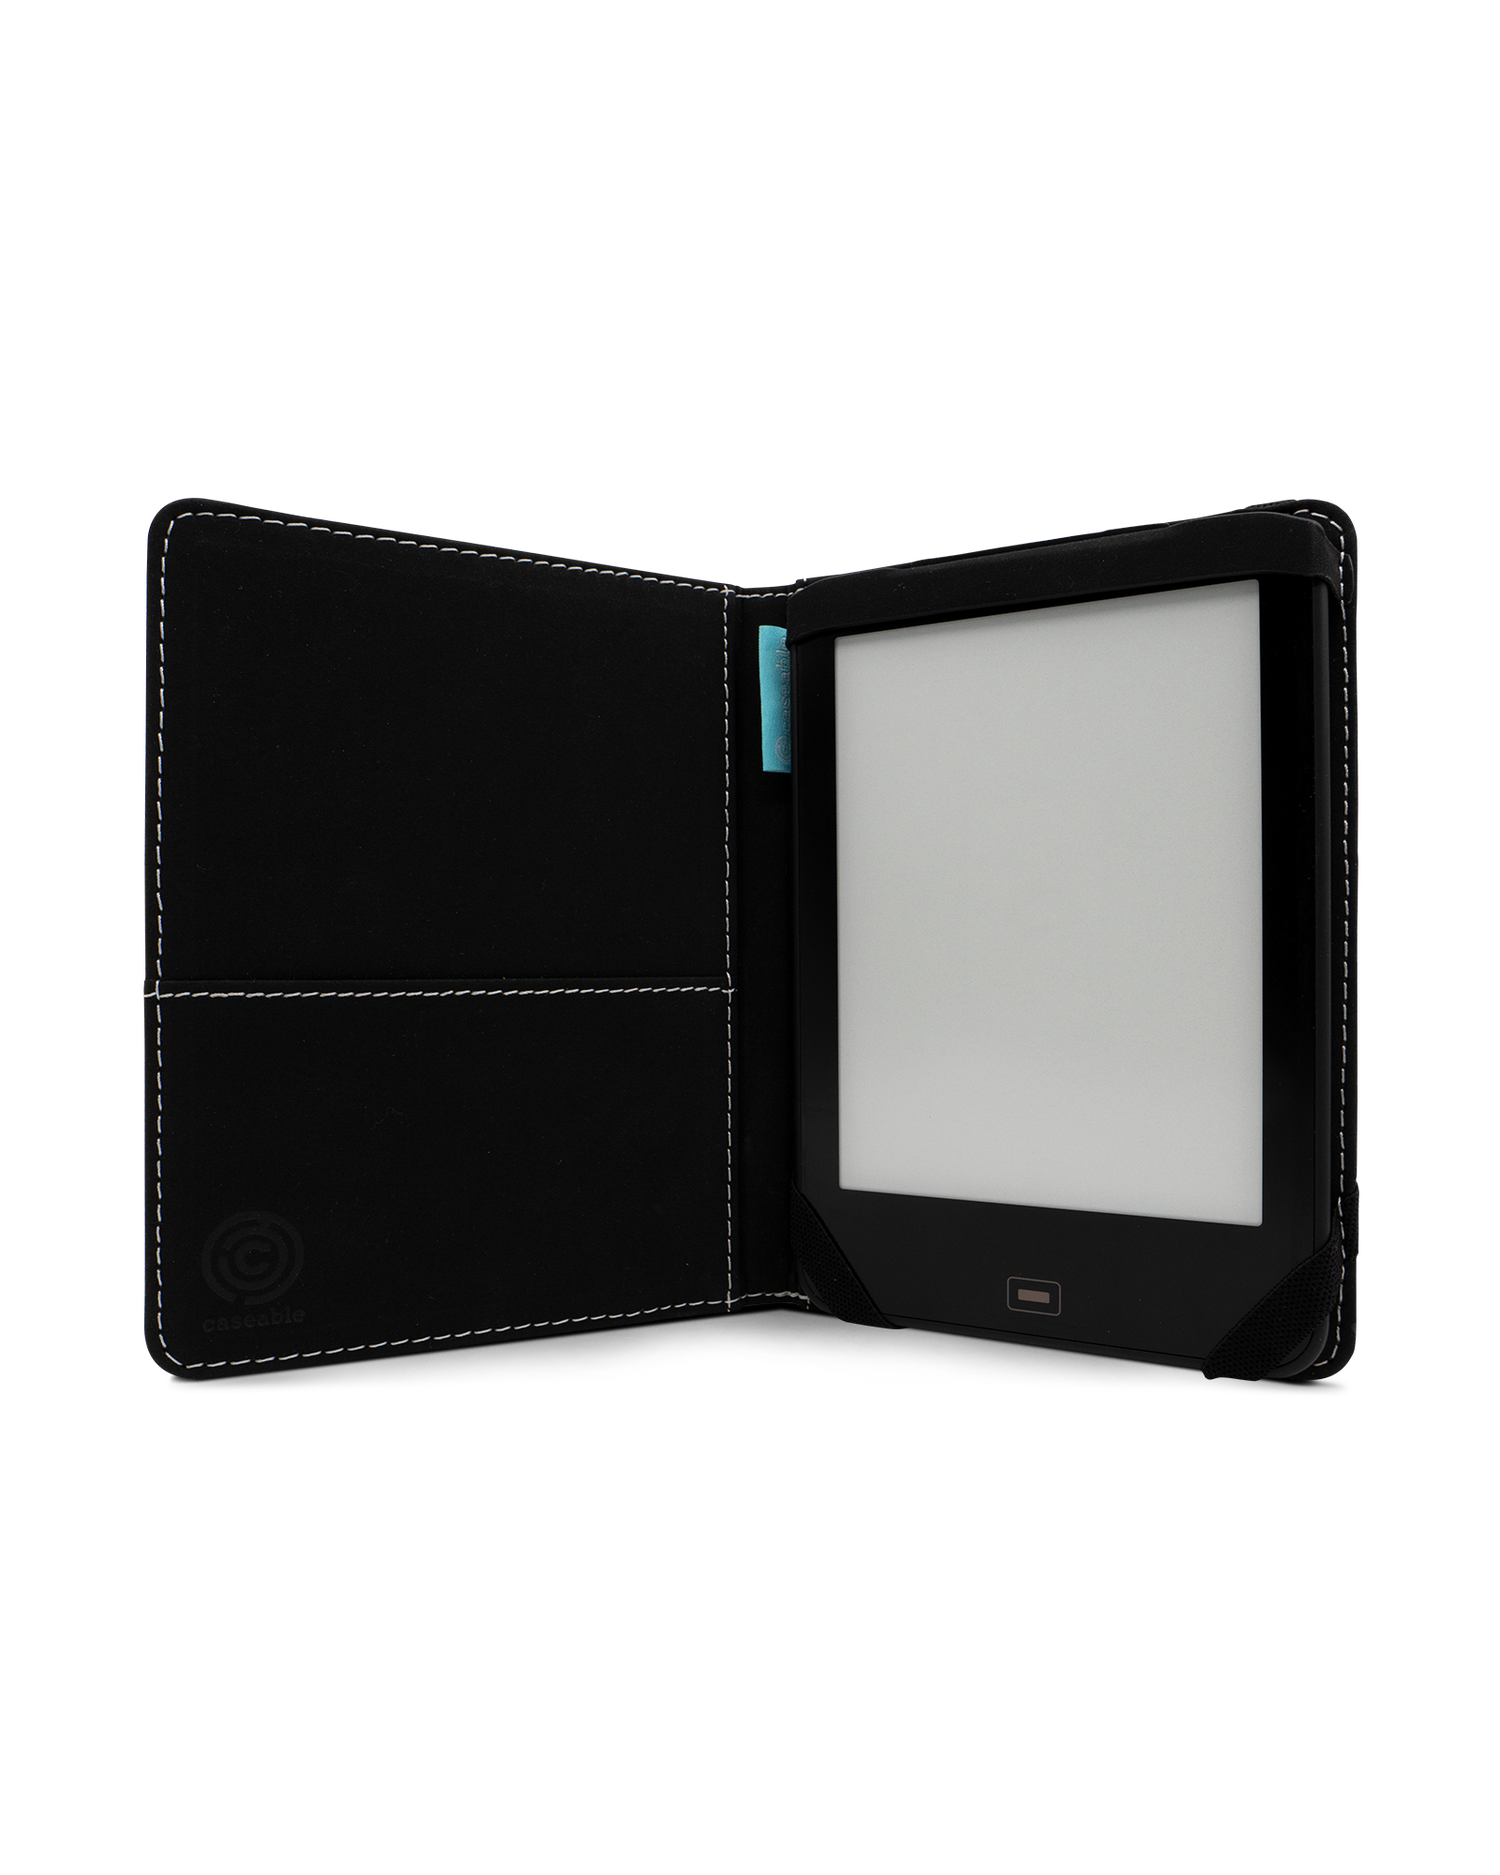 NAVY eReader Case for tolino vision 1 to 4 HD: Opened interior view